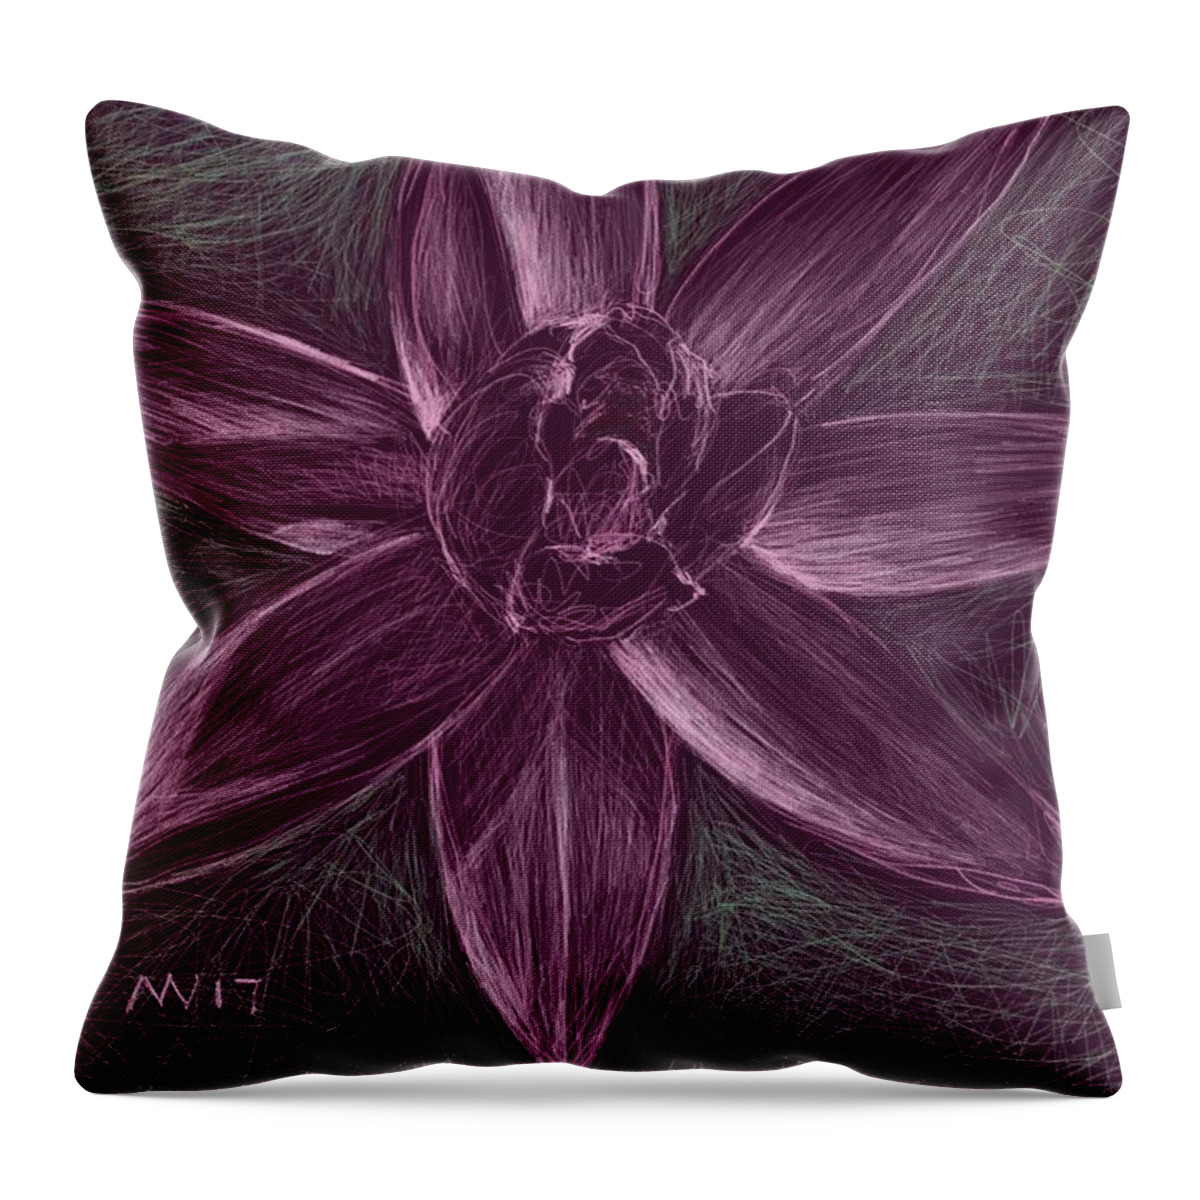 Water Lily Throw Pillow featuring the digital art Water Lily by AnneMarie Welsh